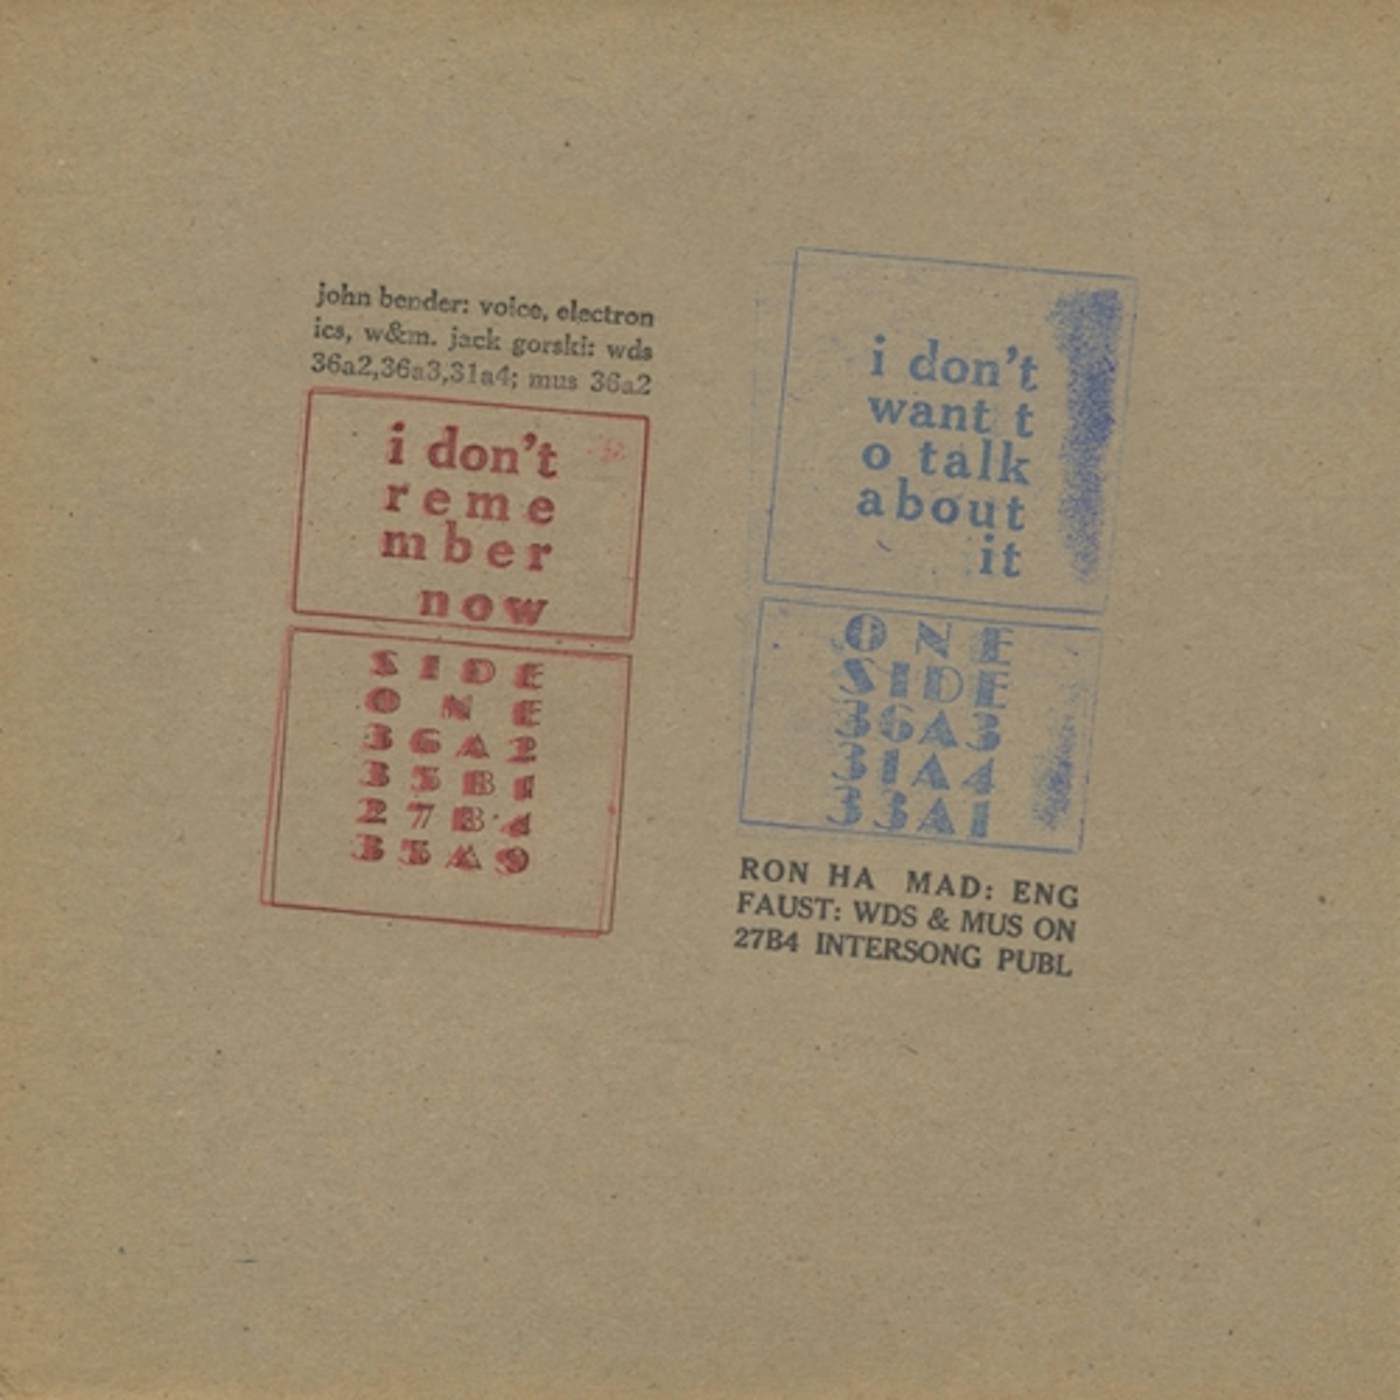 John Bender I DON'T REMEMBER NOW / I DON'T WANT TO TALK ABOUT Vinyl Record